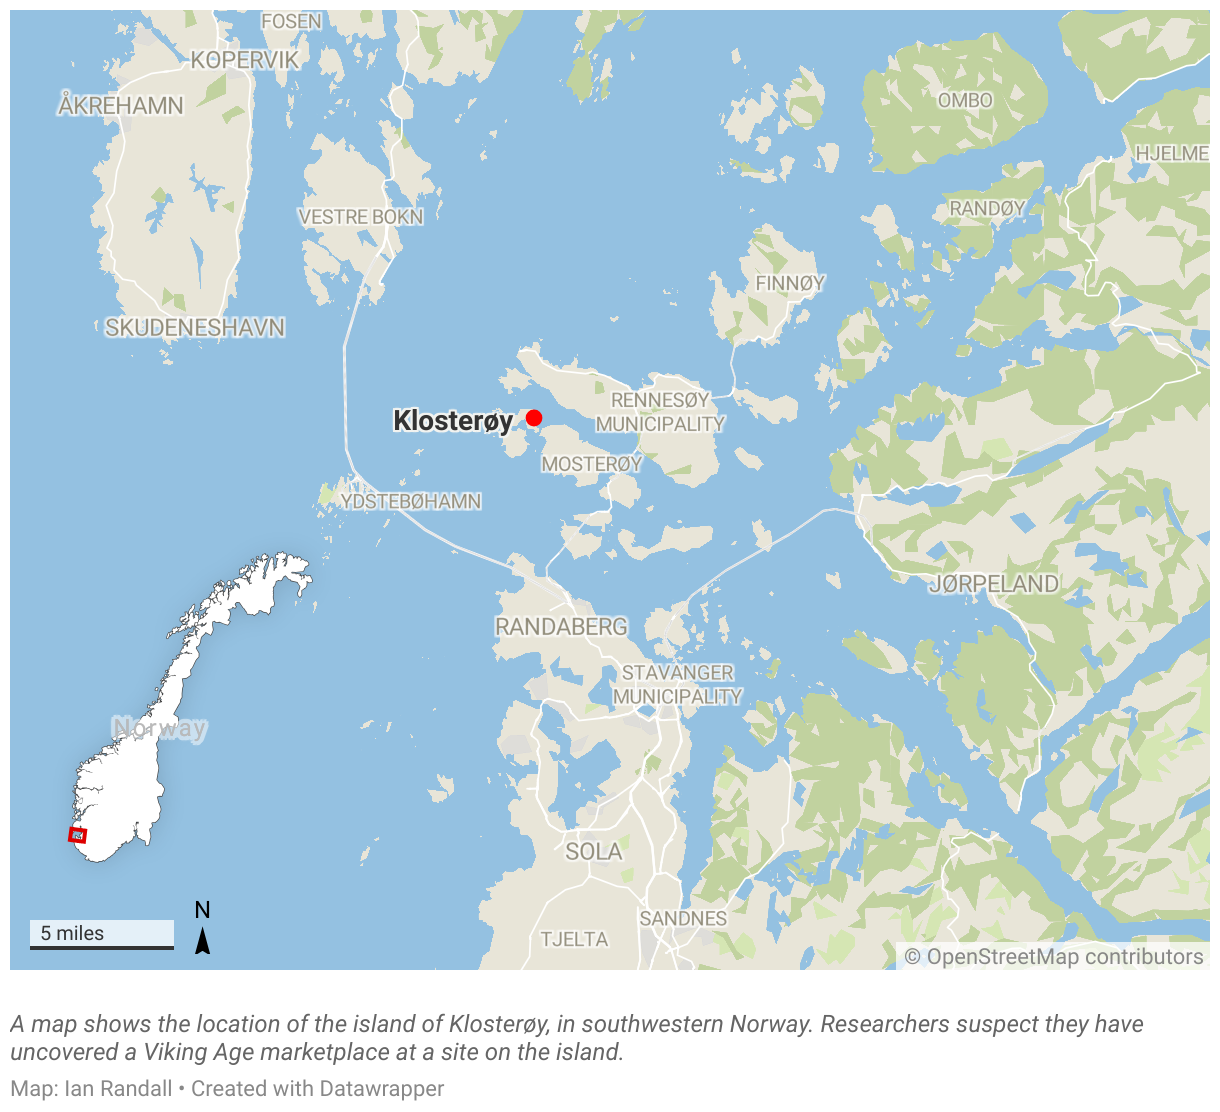 A map shows the location of the island of Klosterøy, in southwestern Norway.